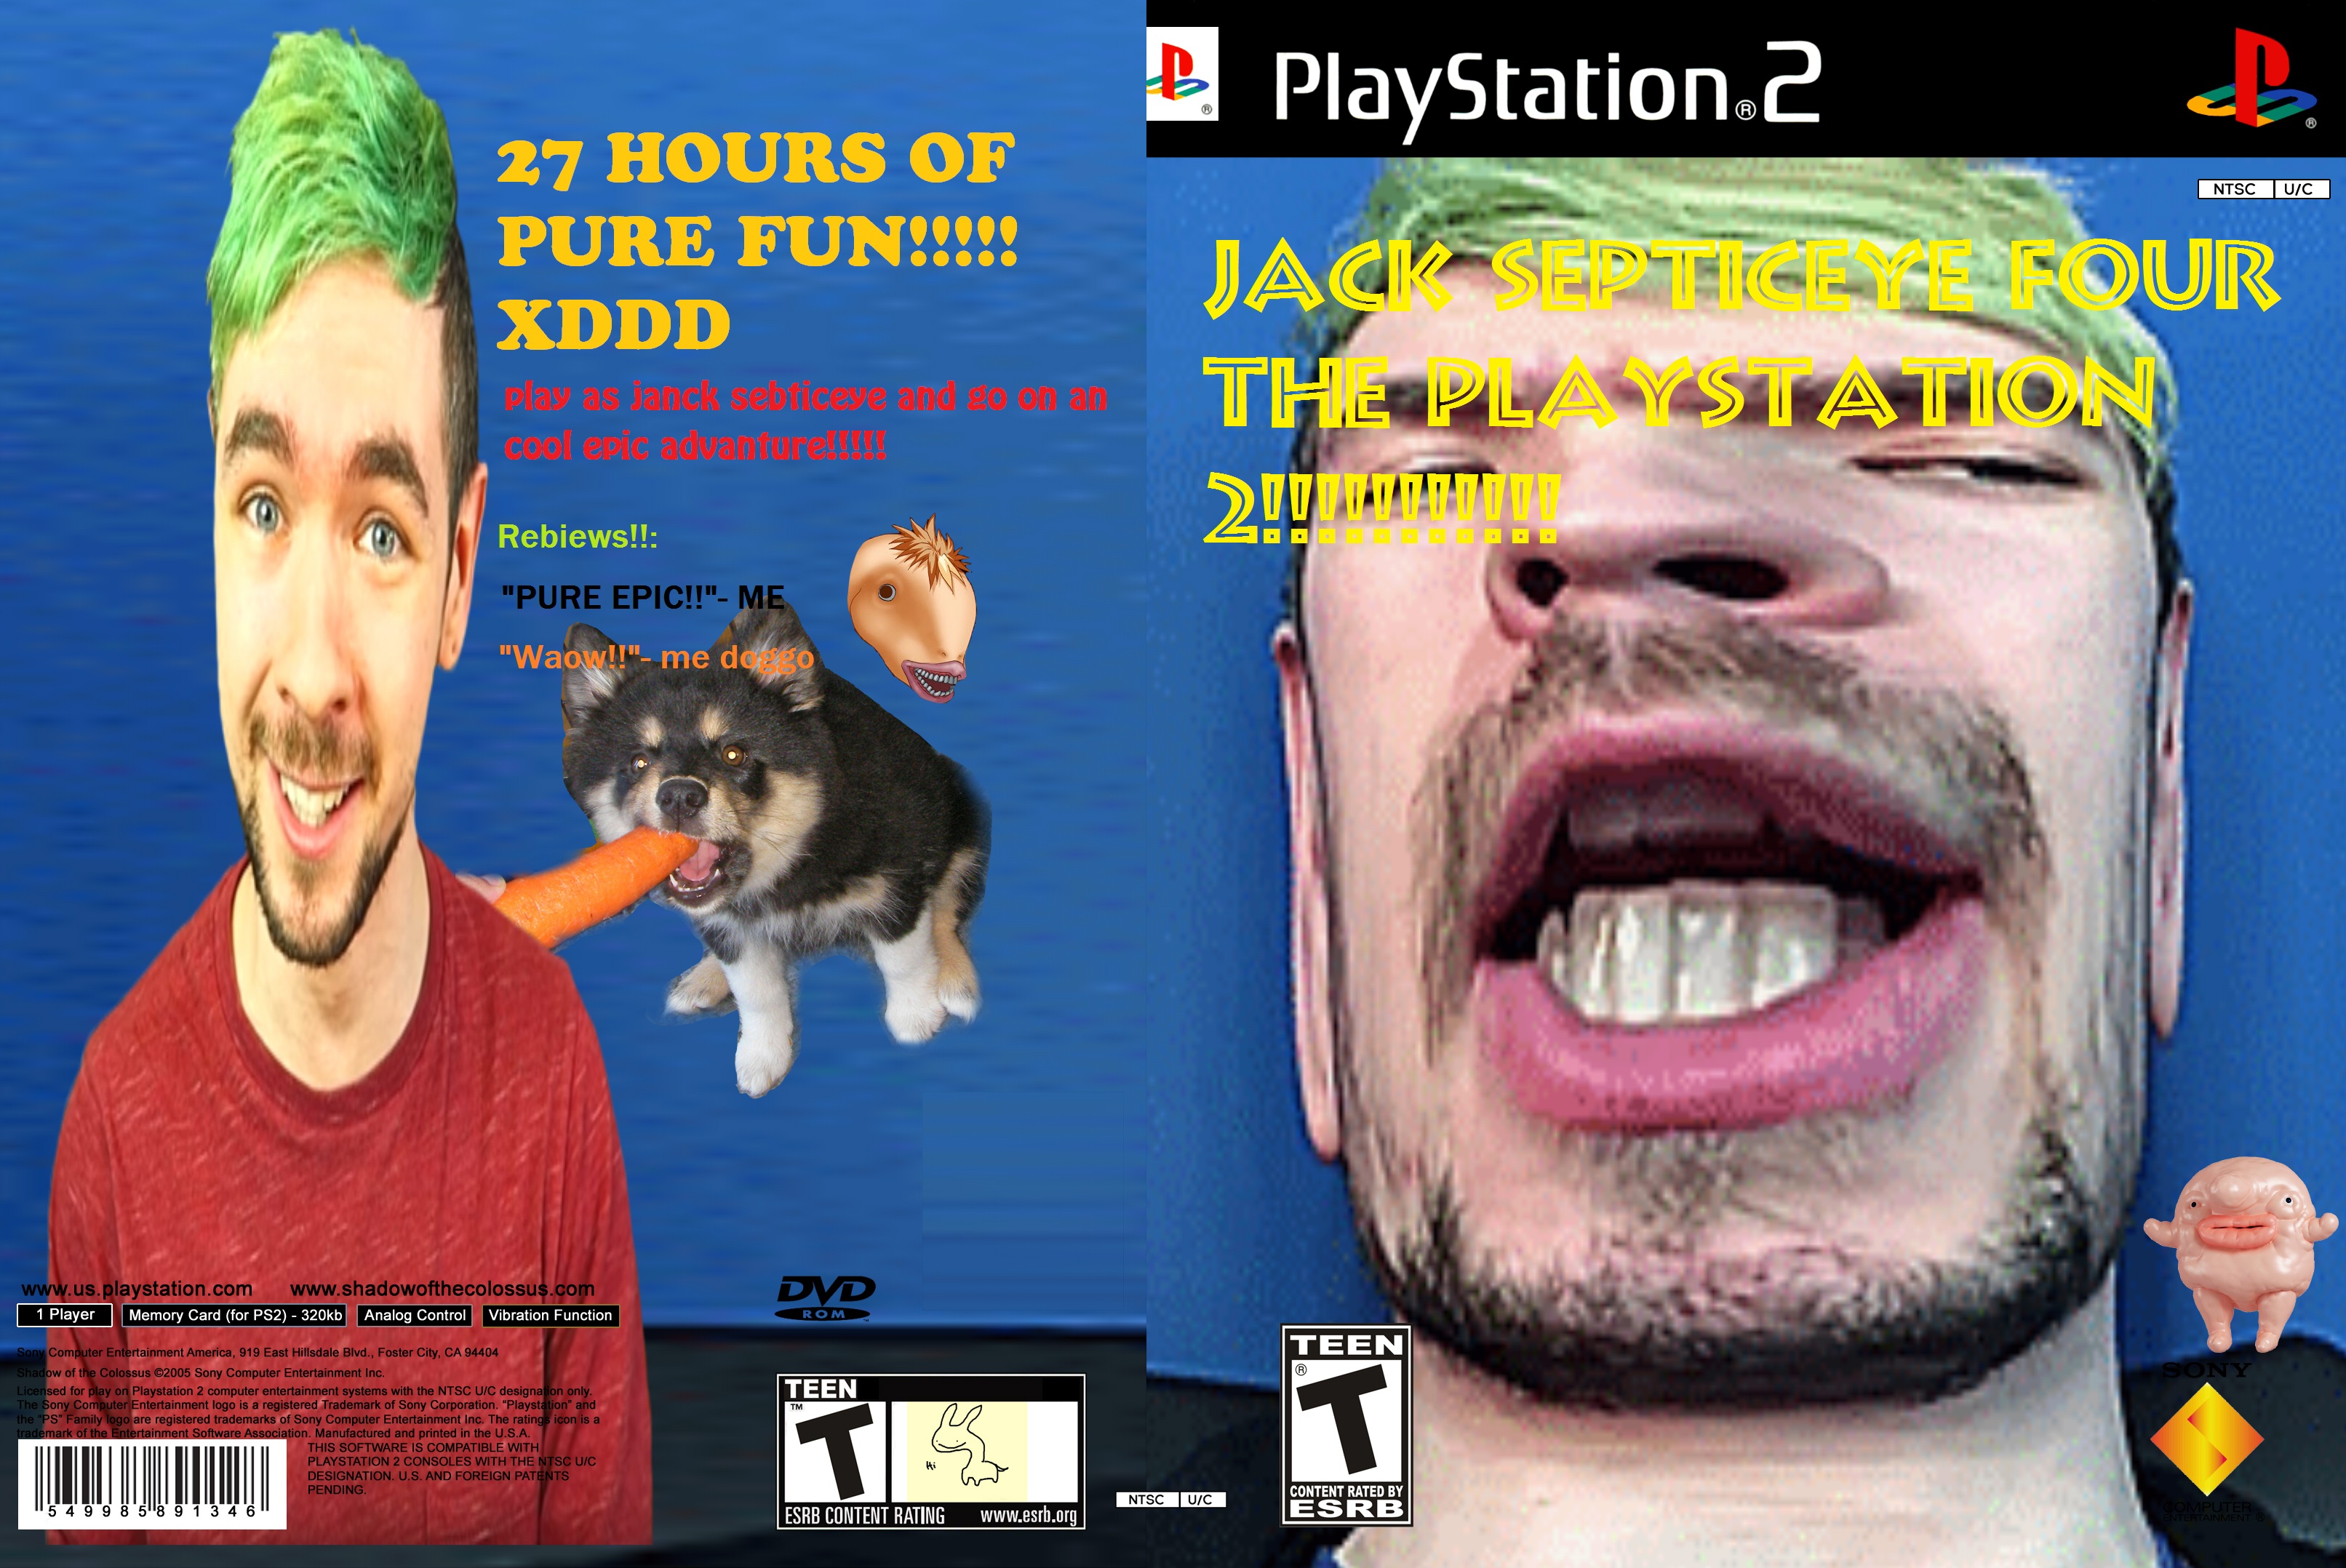 jack septiceye for the playstation 2 box cover